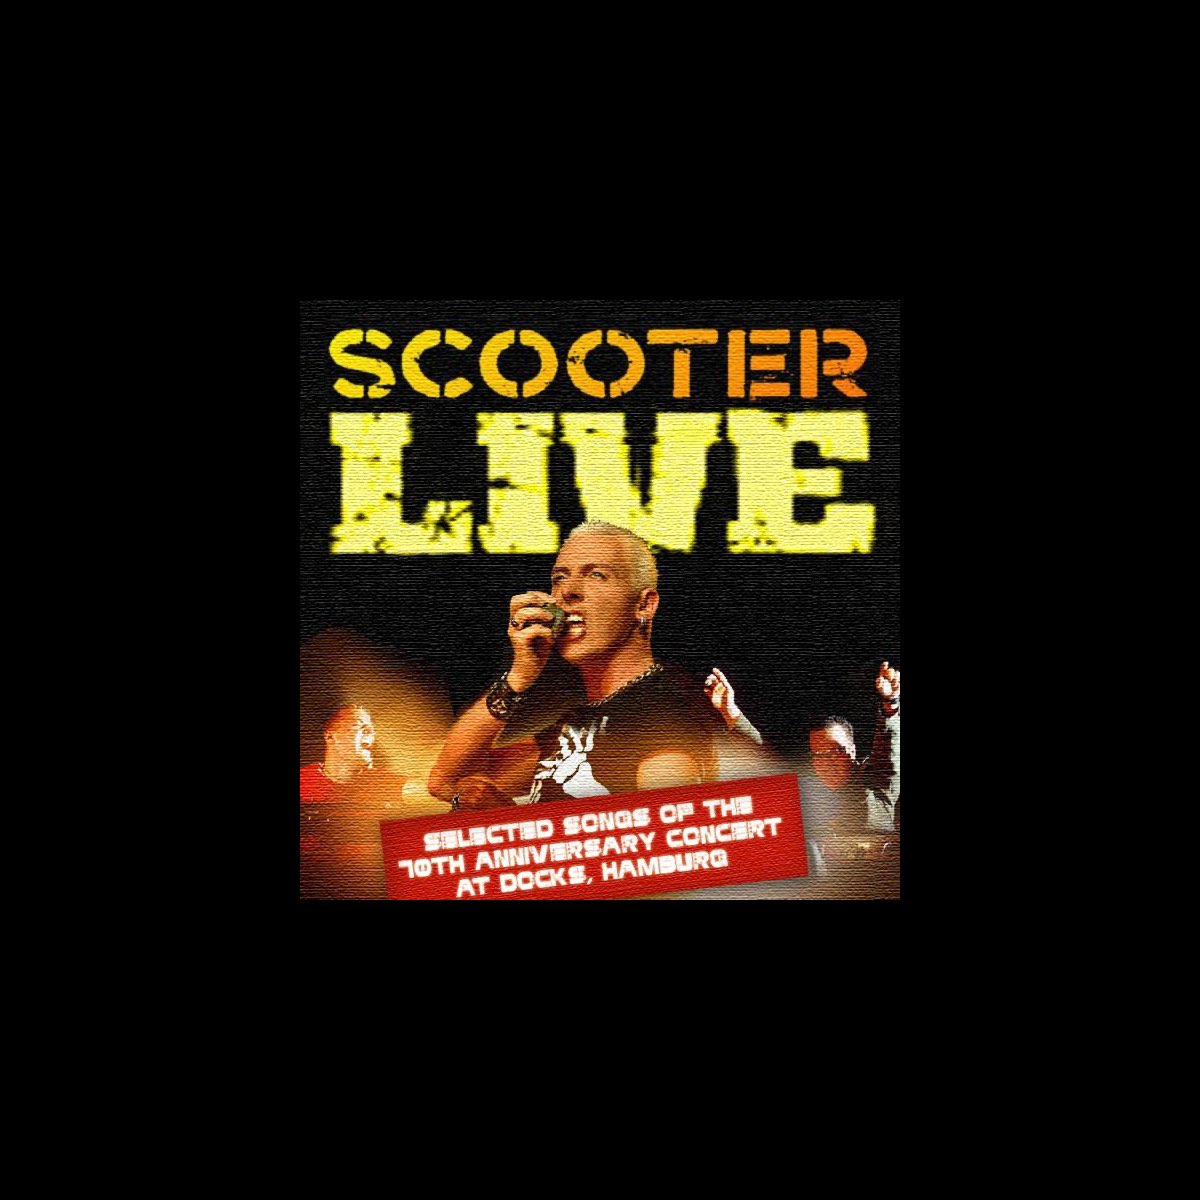 Live - Selected Songs of the 10th Anniversary Concert At Docks, by Scooter on Music